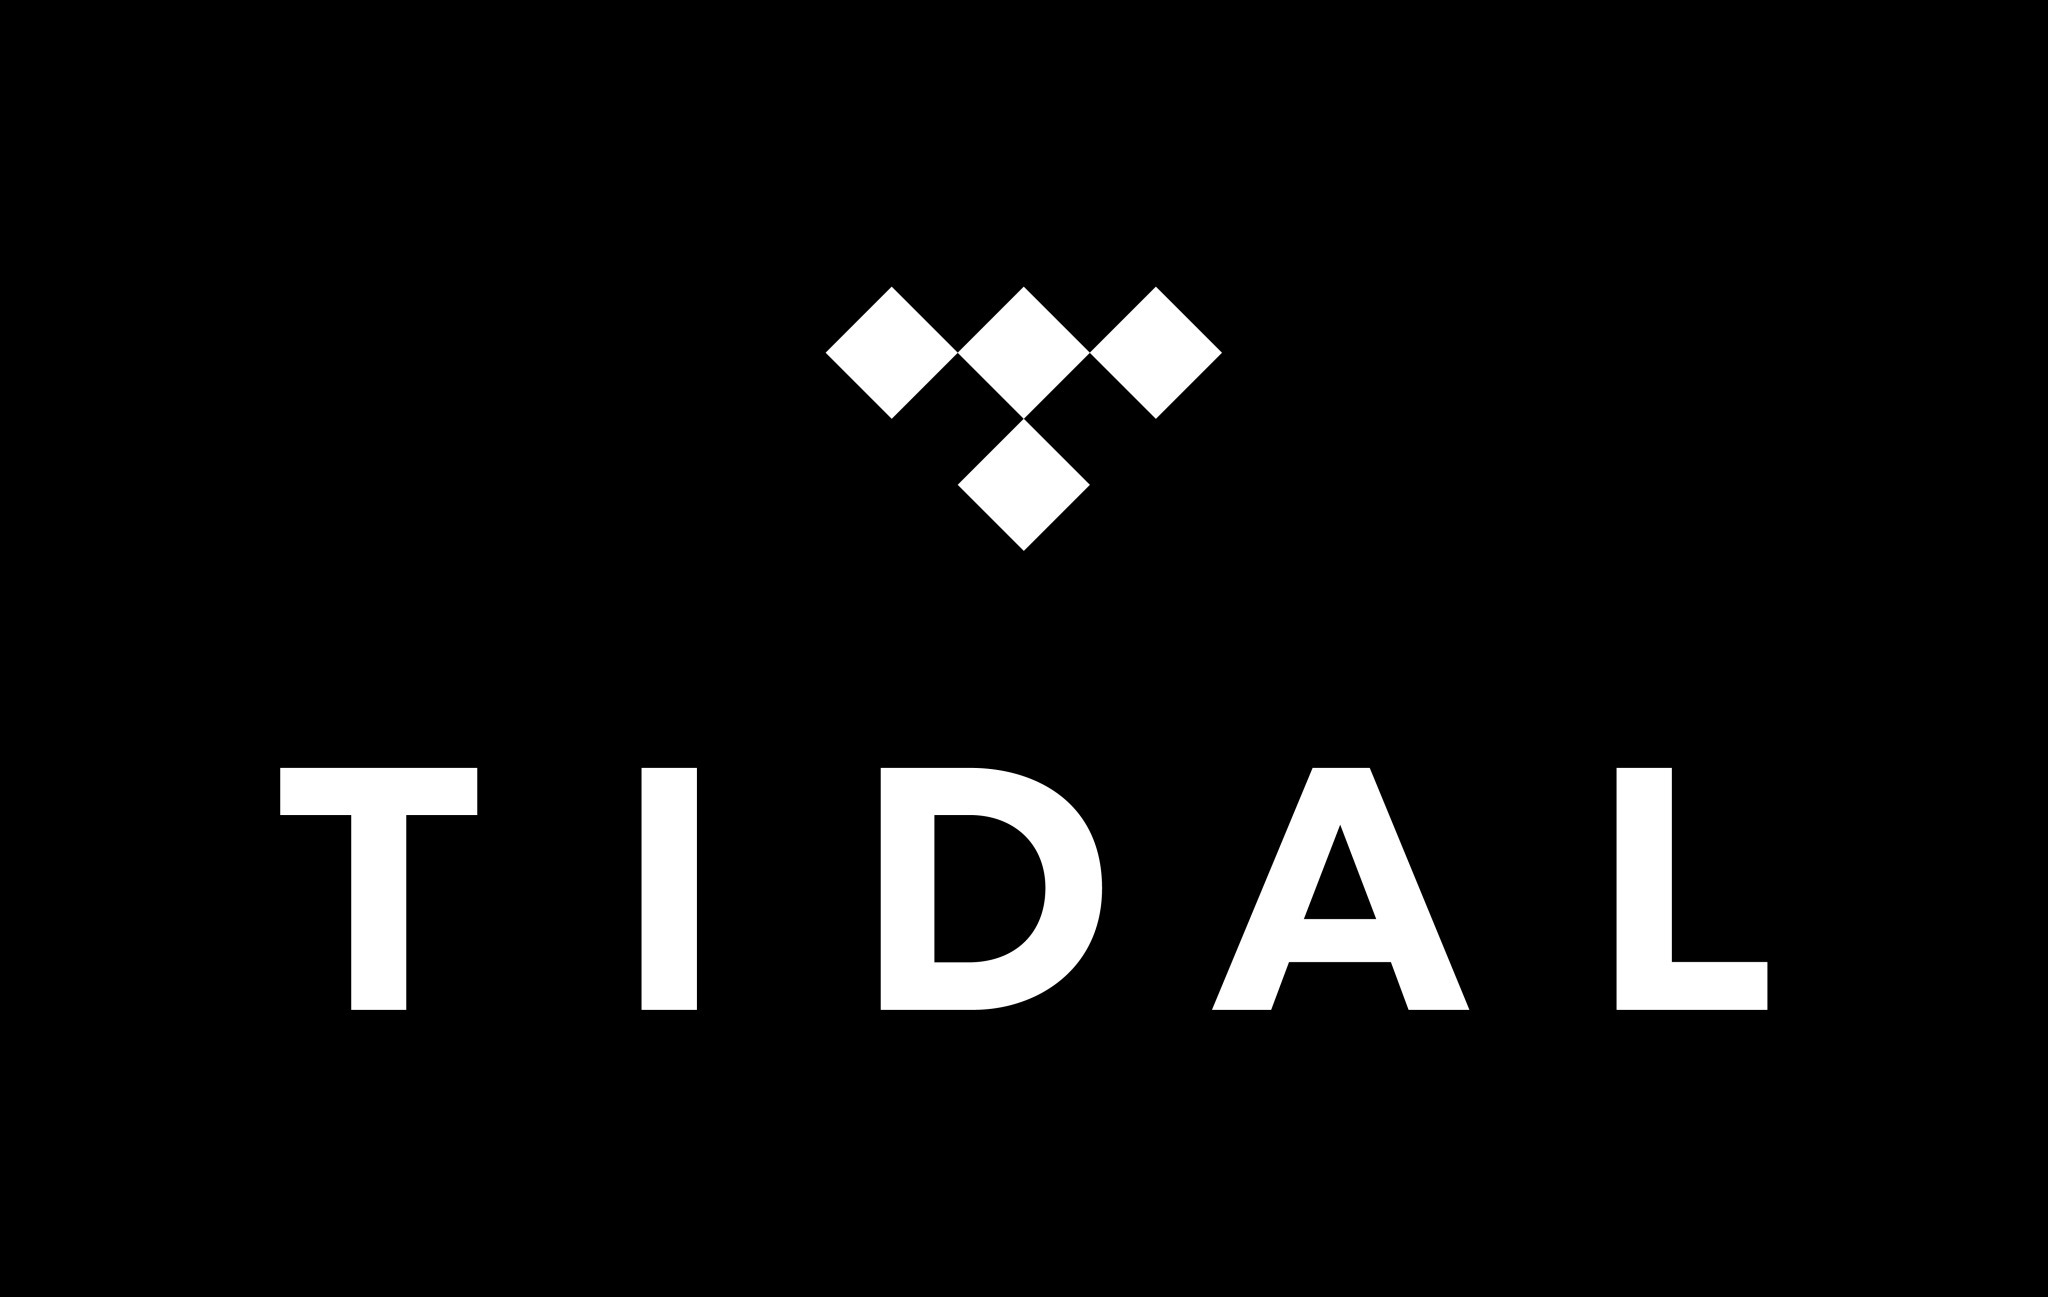 What Is Tidal?